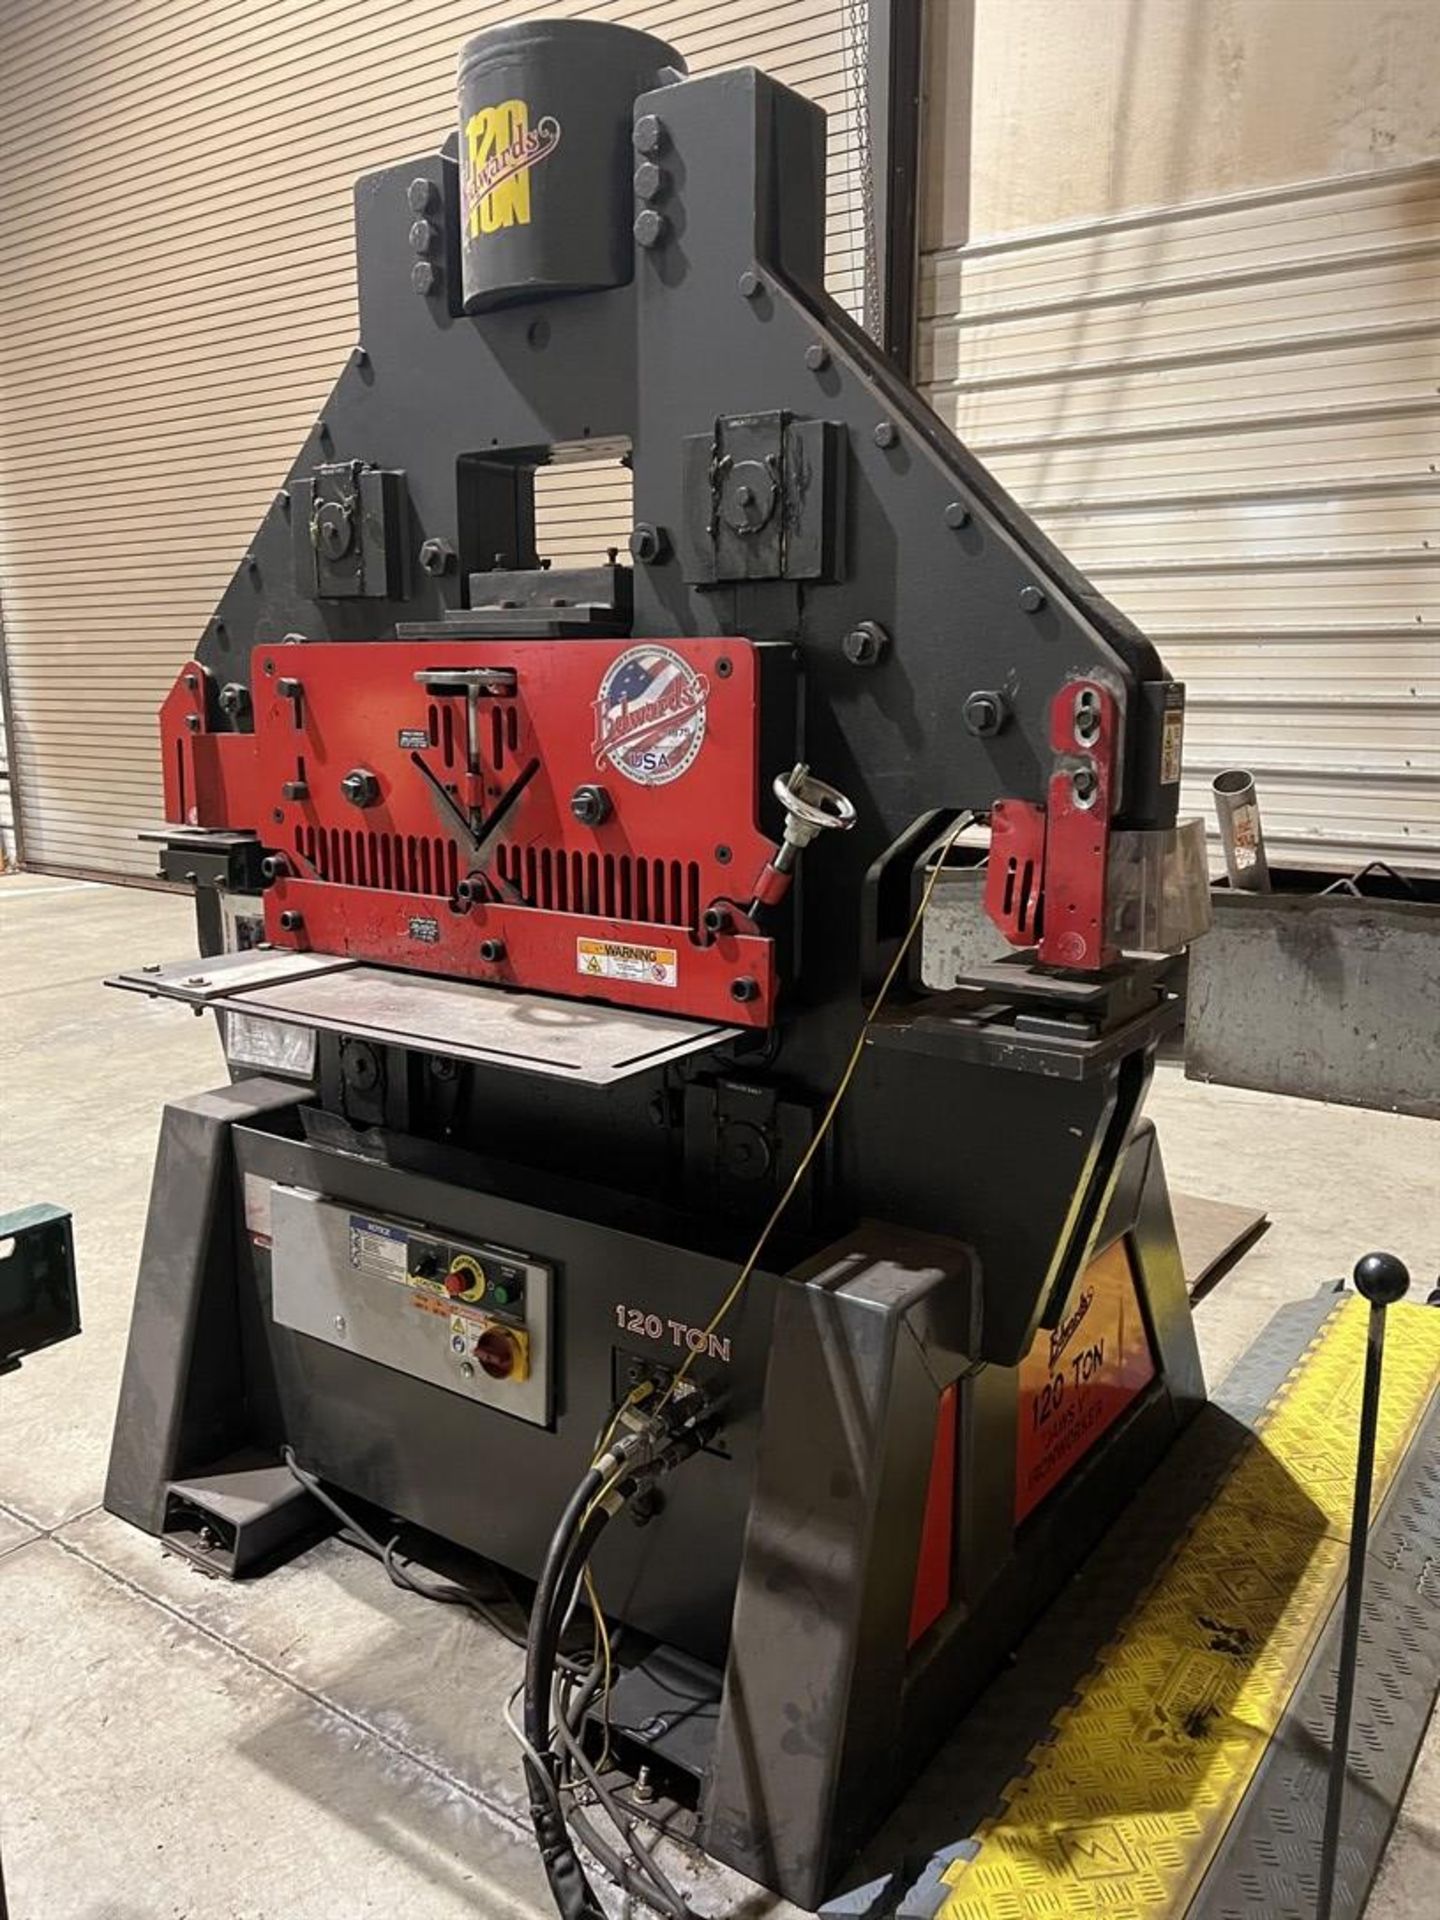 2015 EDWARDS 120 Ton Ironworker, s/n 030715IW120, 1-1/2” Dia in 1” A36 Punch Max Capacity, 2-1/2”